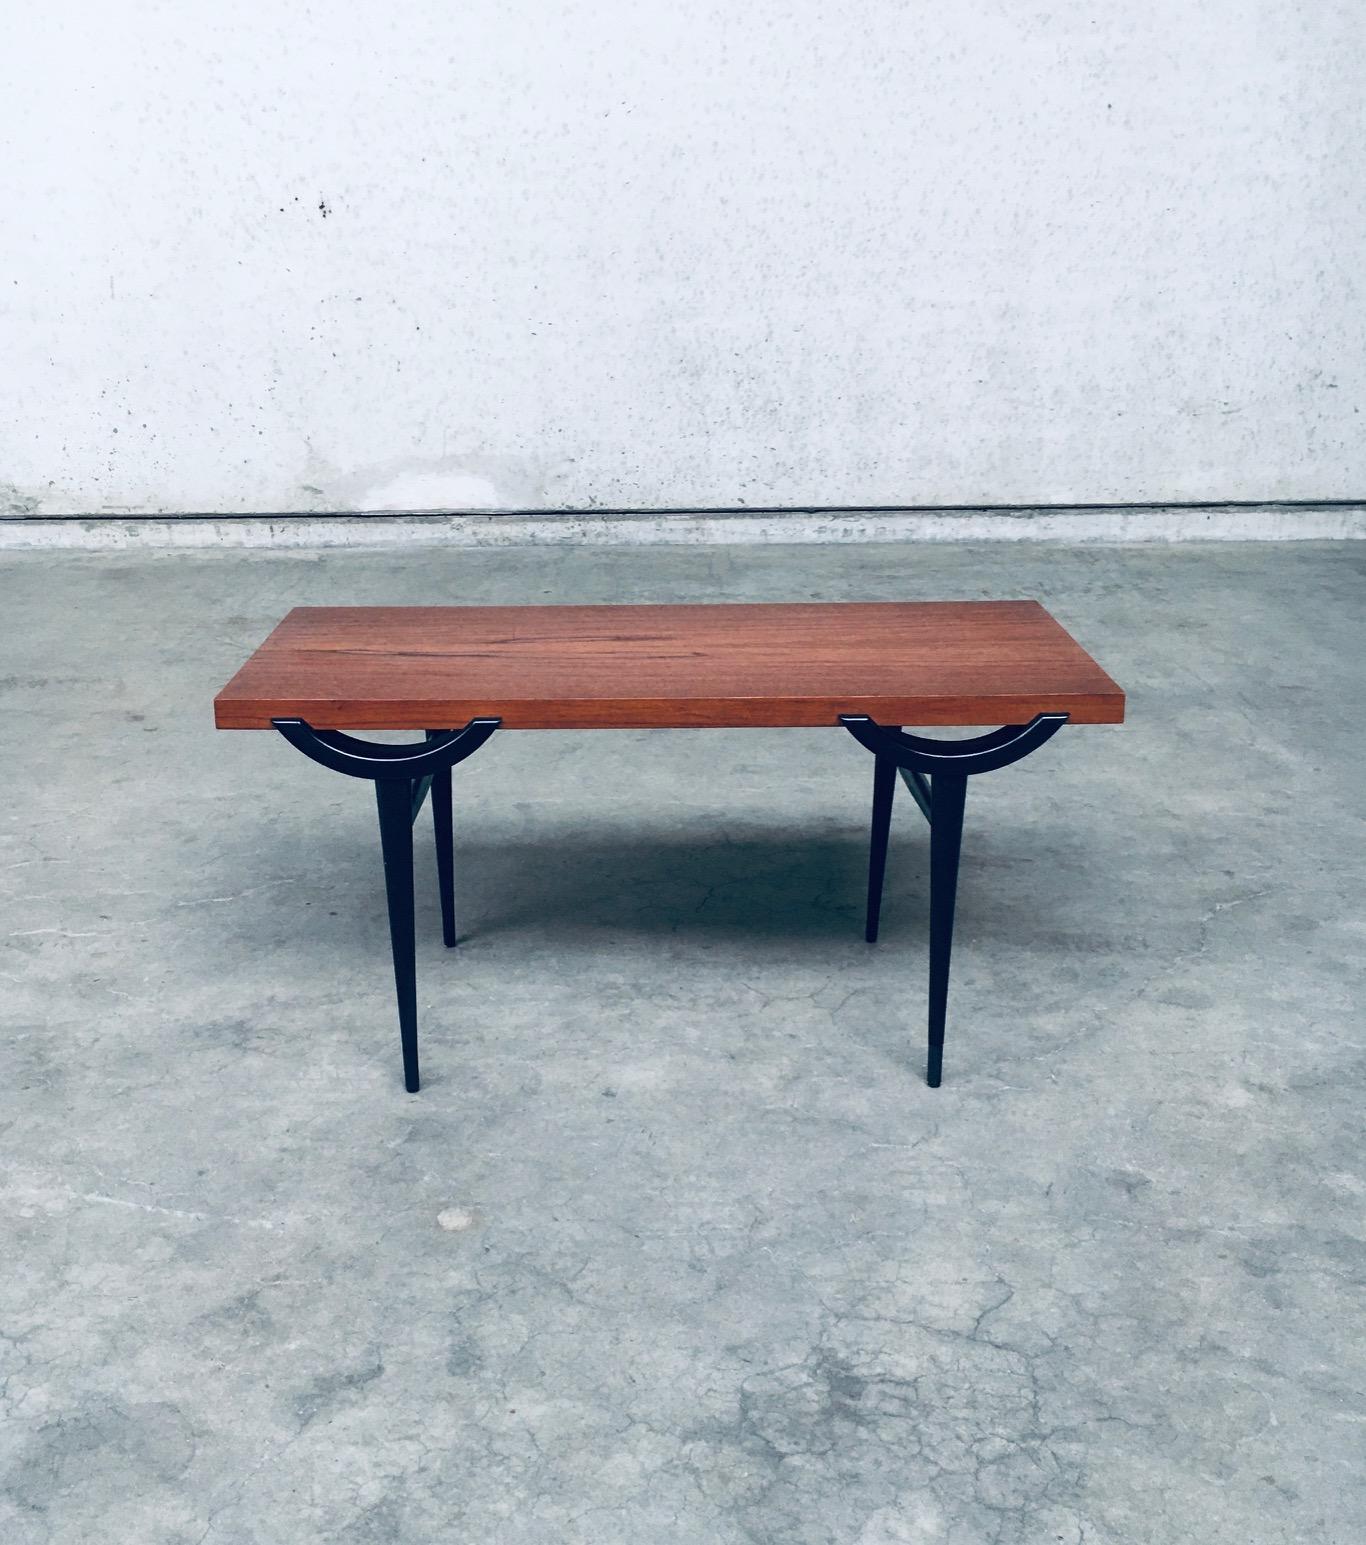 Lacquered Midcentury Scandinavian Design Coffee Table, Denmark 1960's For Sale